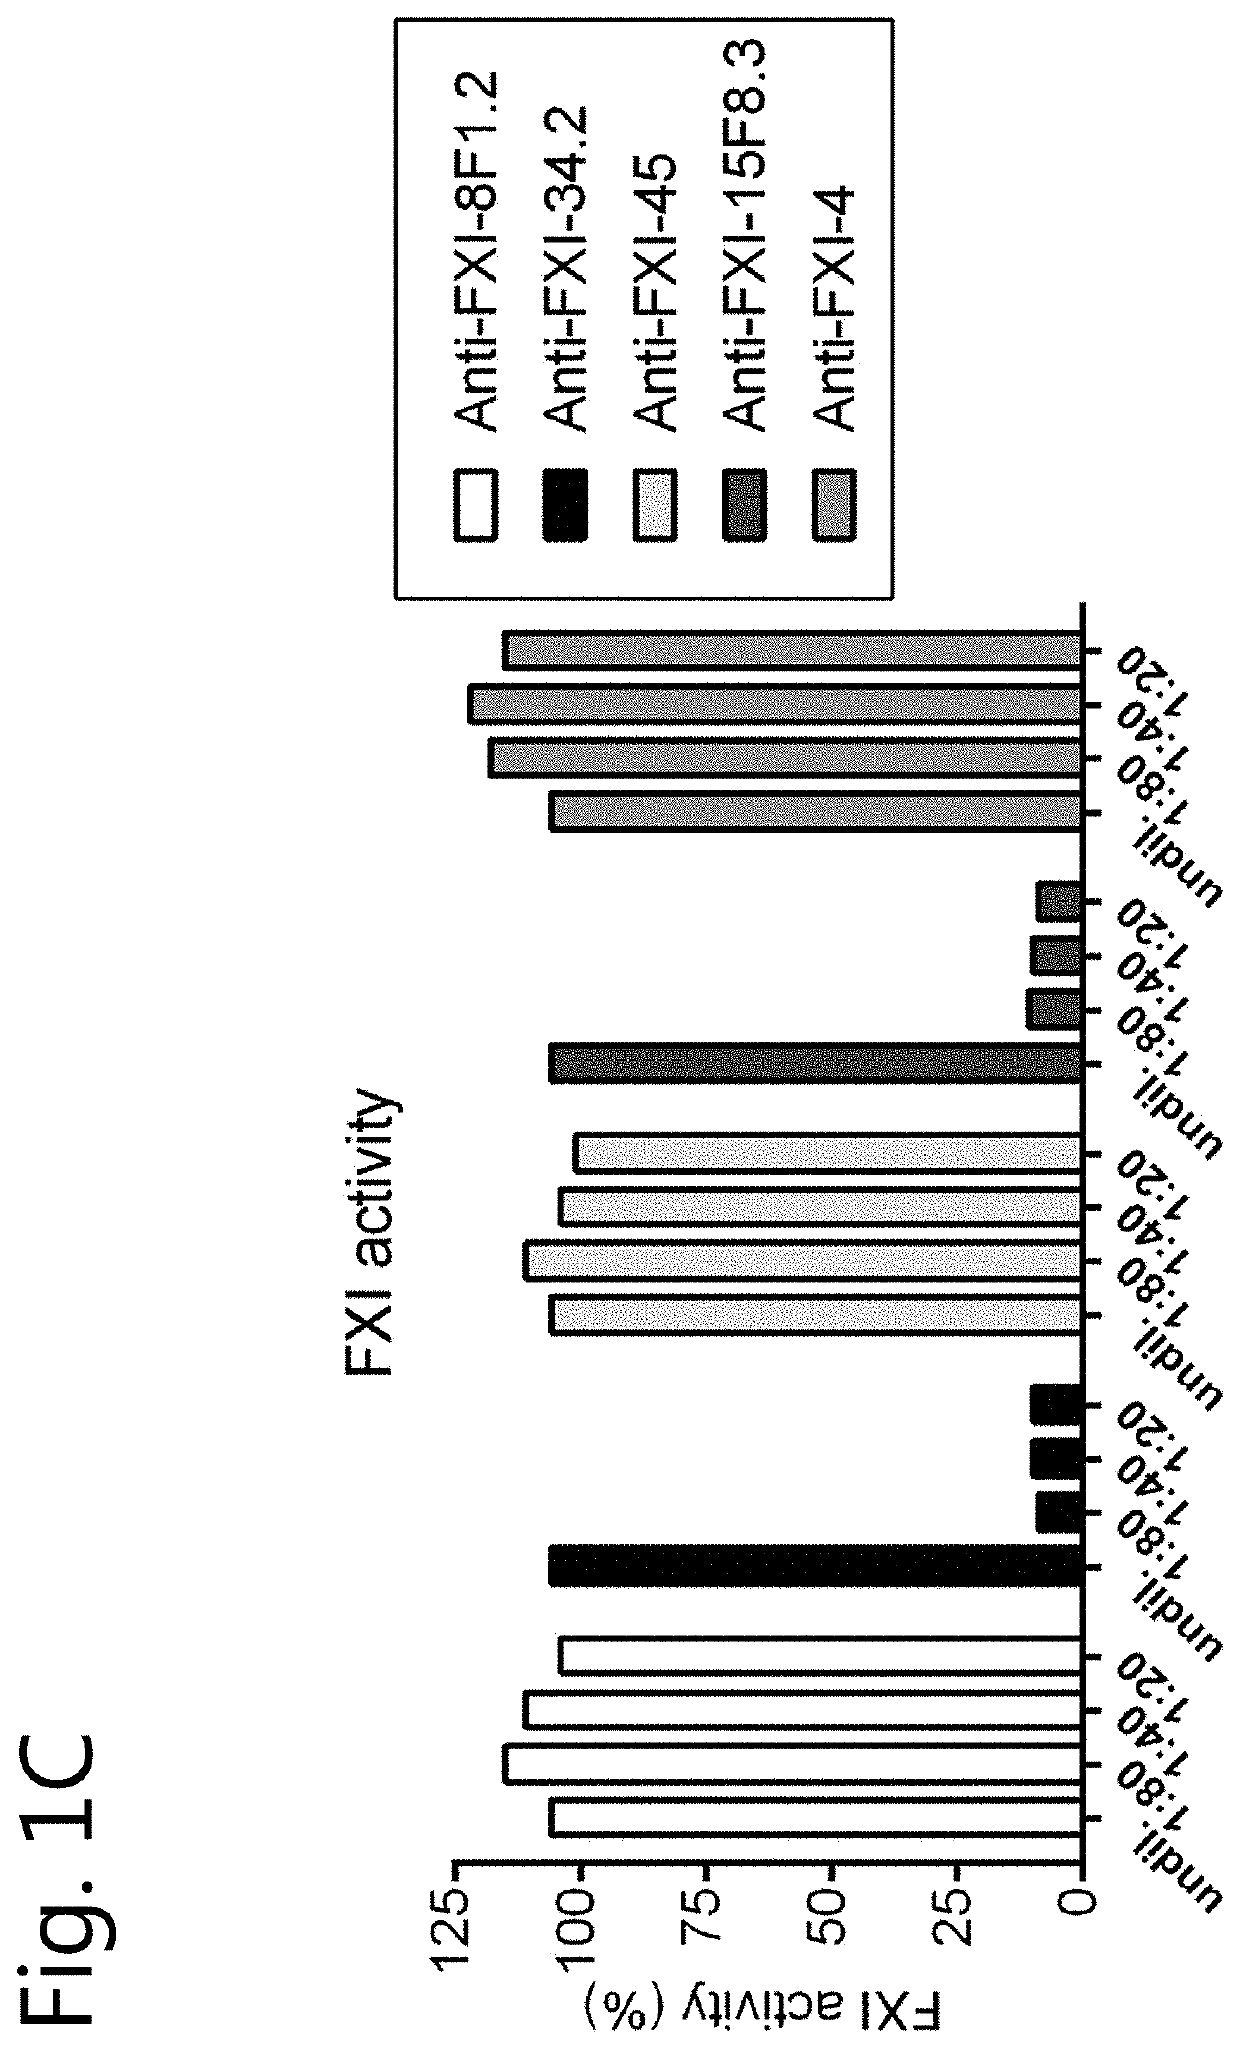 Monoclonal antibodies against the active site of factor XI and uses thereof